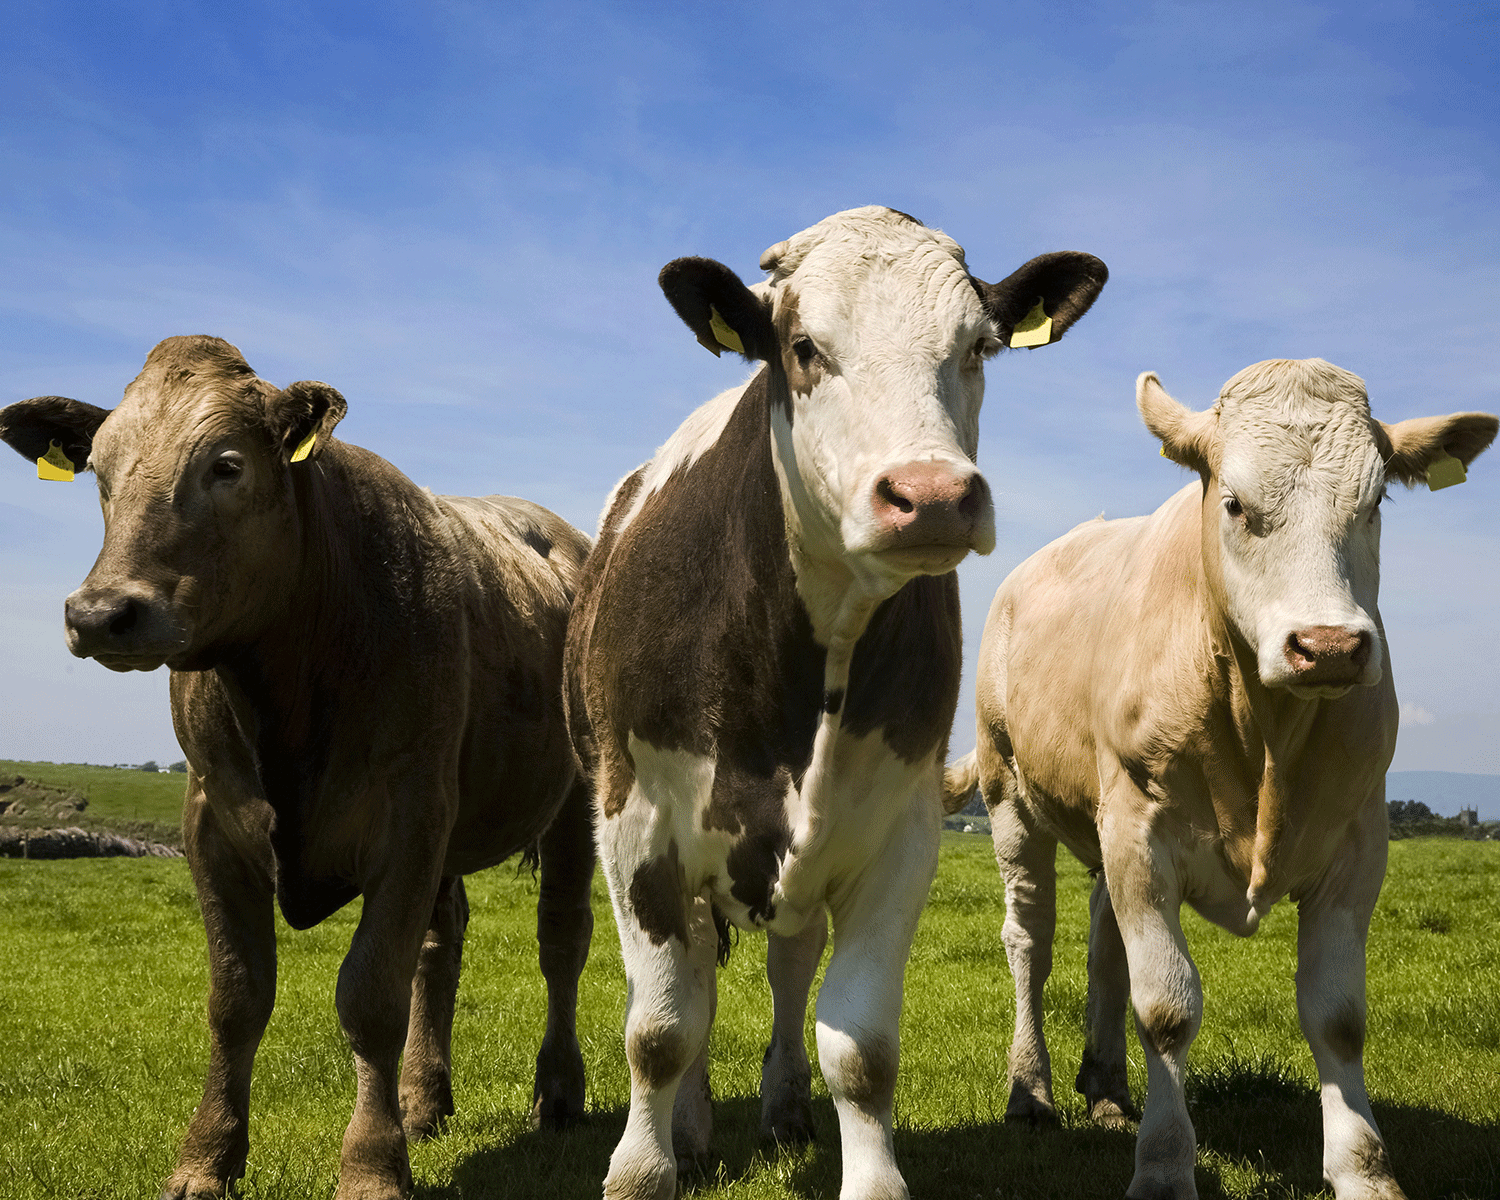 Farmers in the US east coast state are concerned they could be targeted by laws banning bestiality